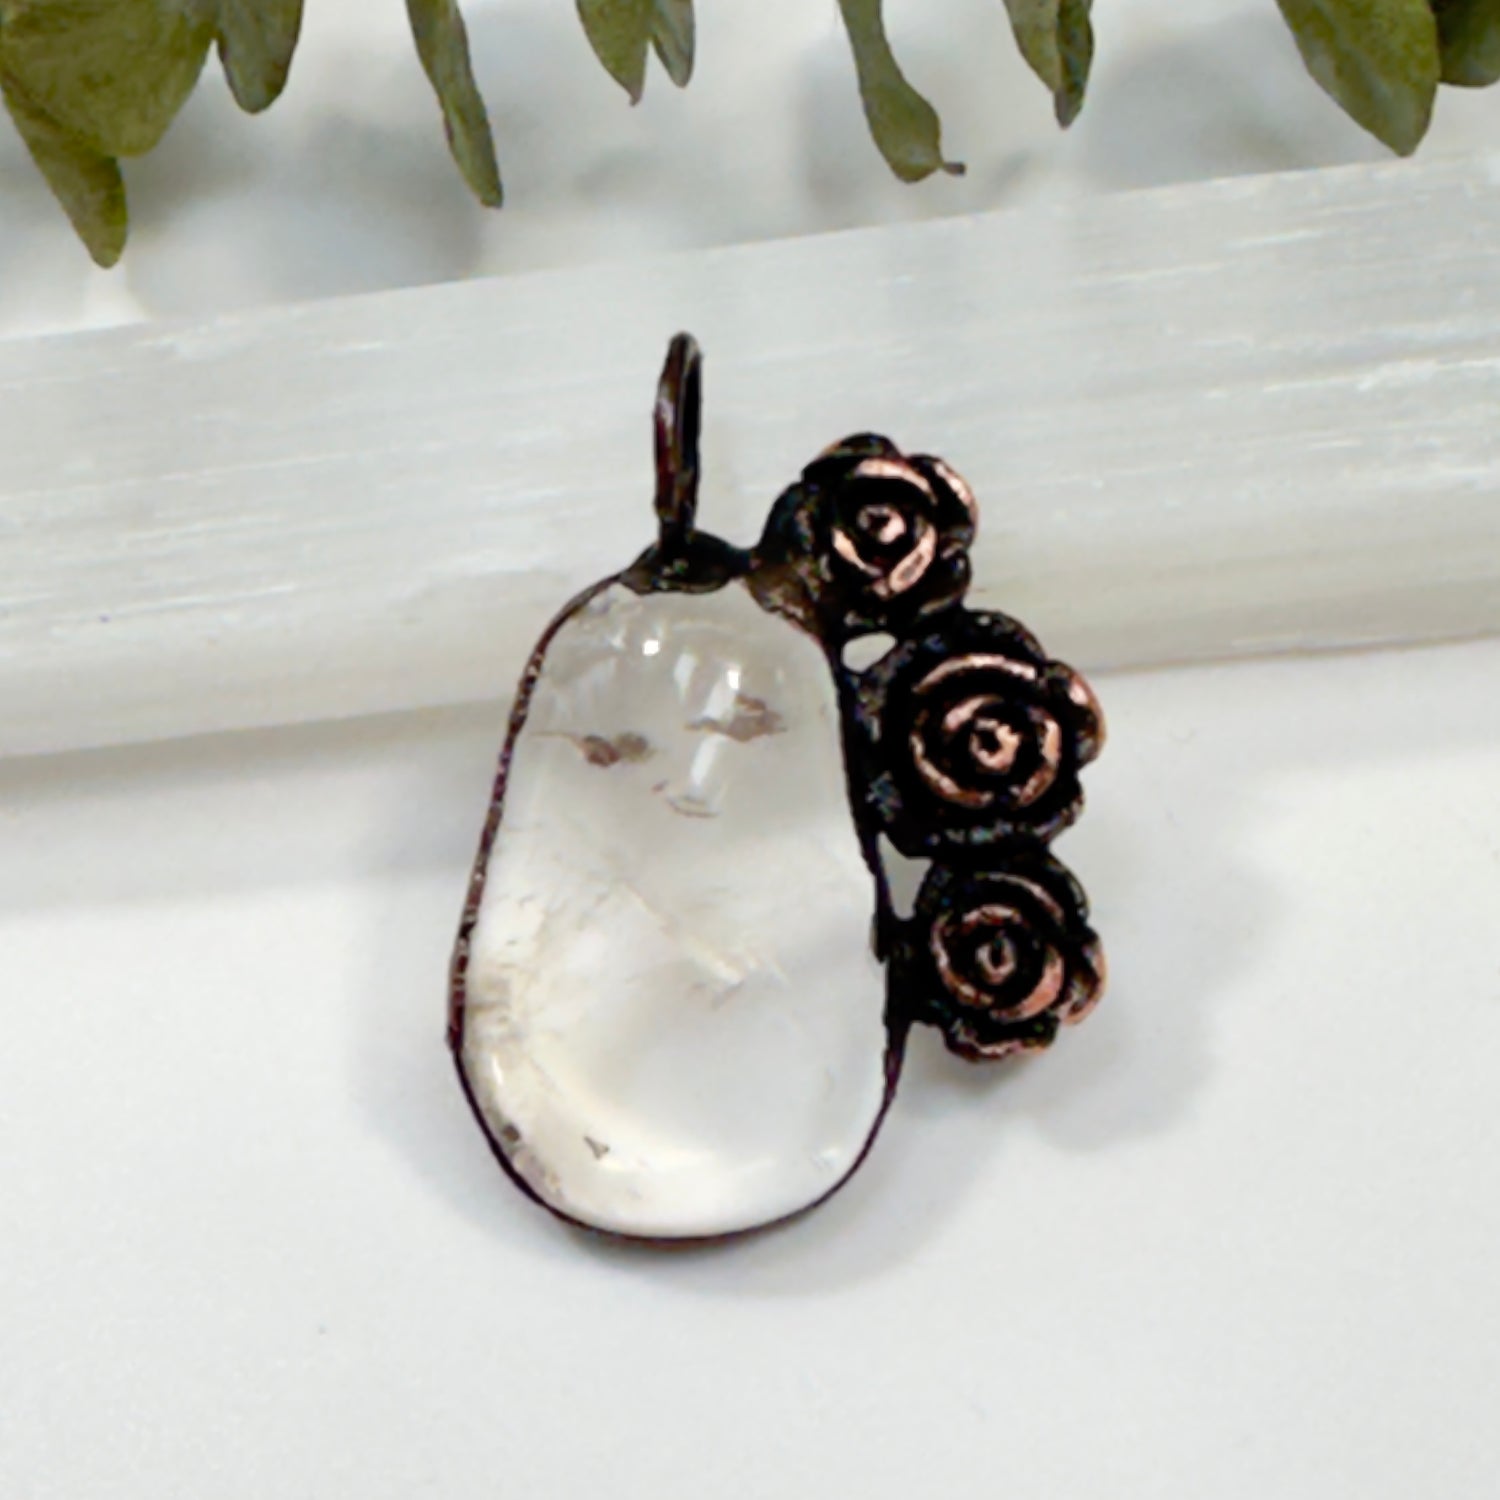 Clear quartz crystal necklace with antique roses